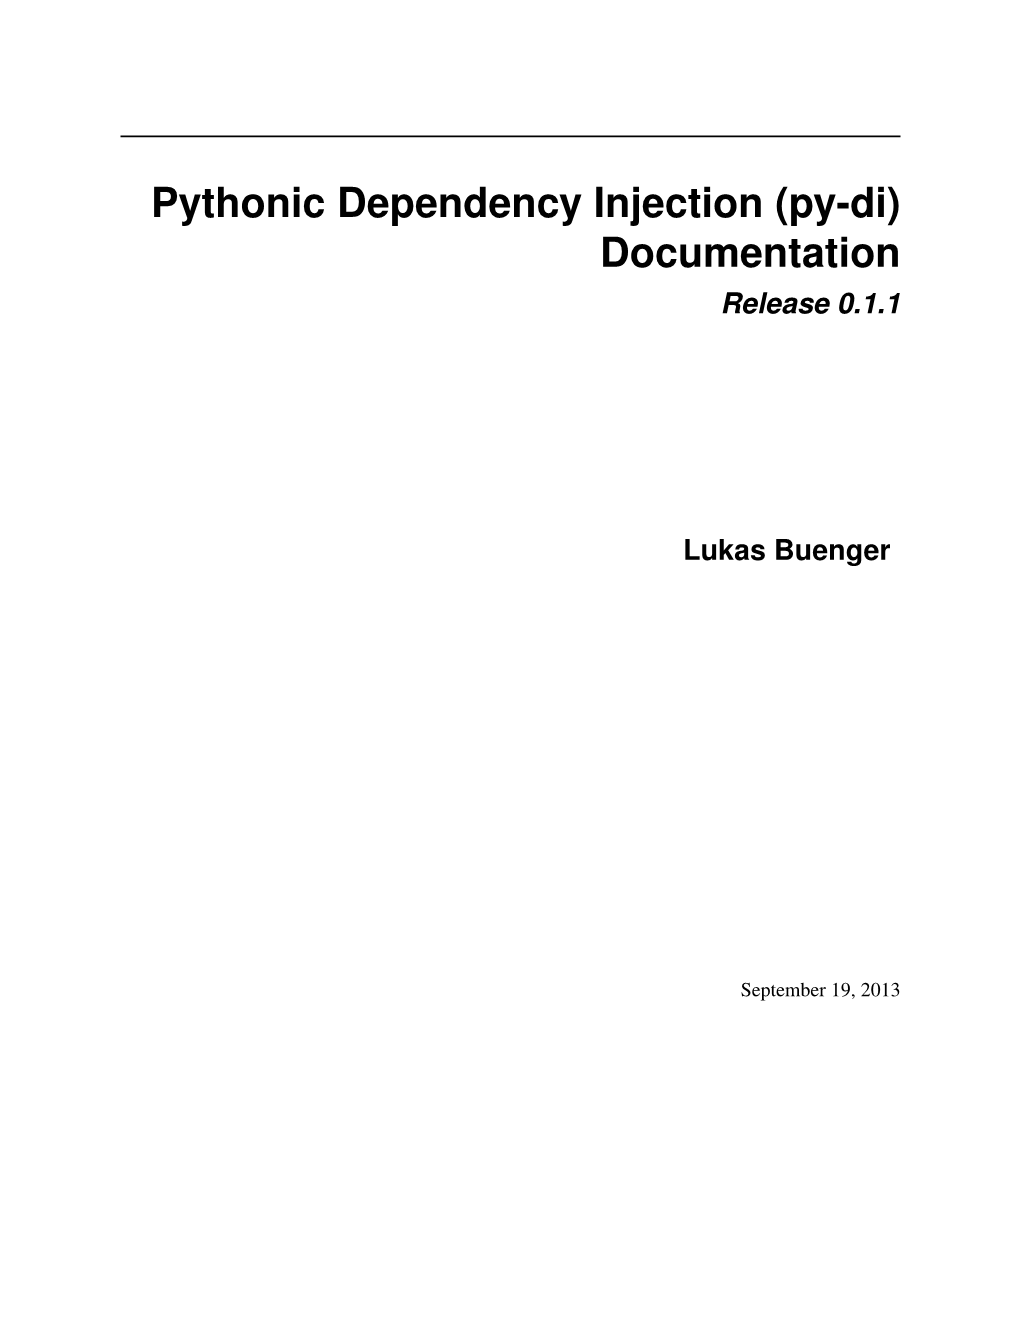 Pythonic Dependency Injection (Py-Di) Documentation Release 0.1.1